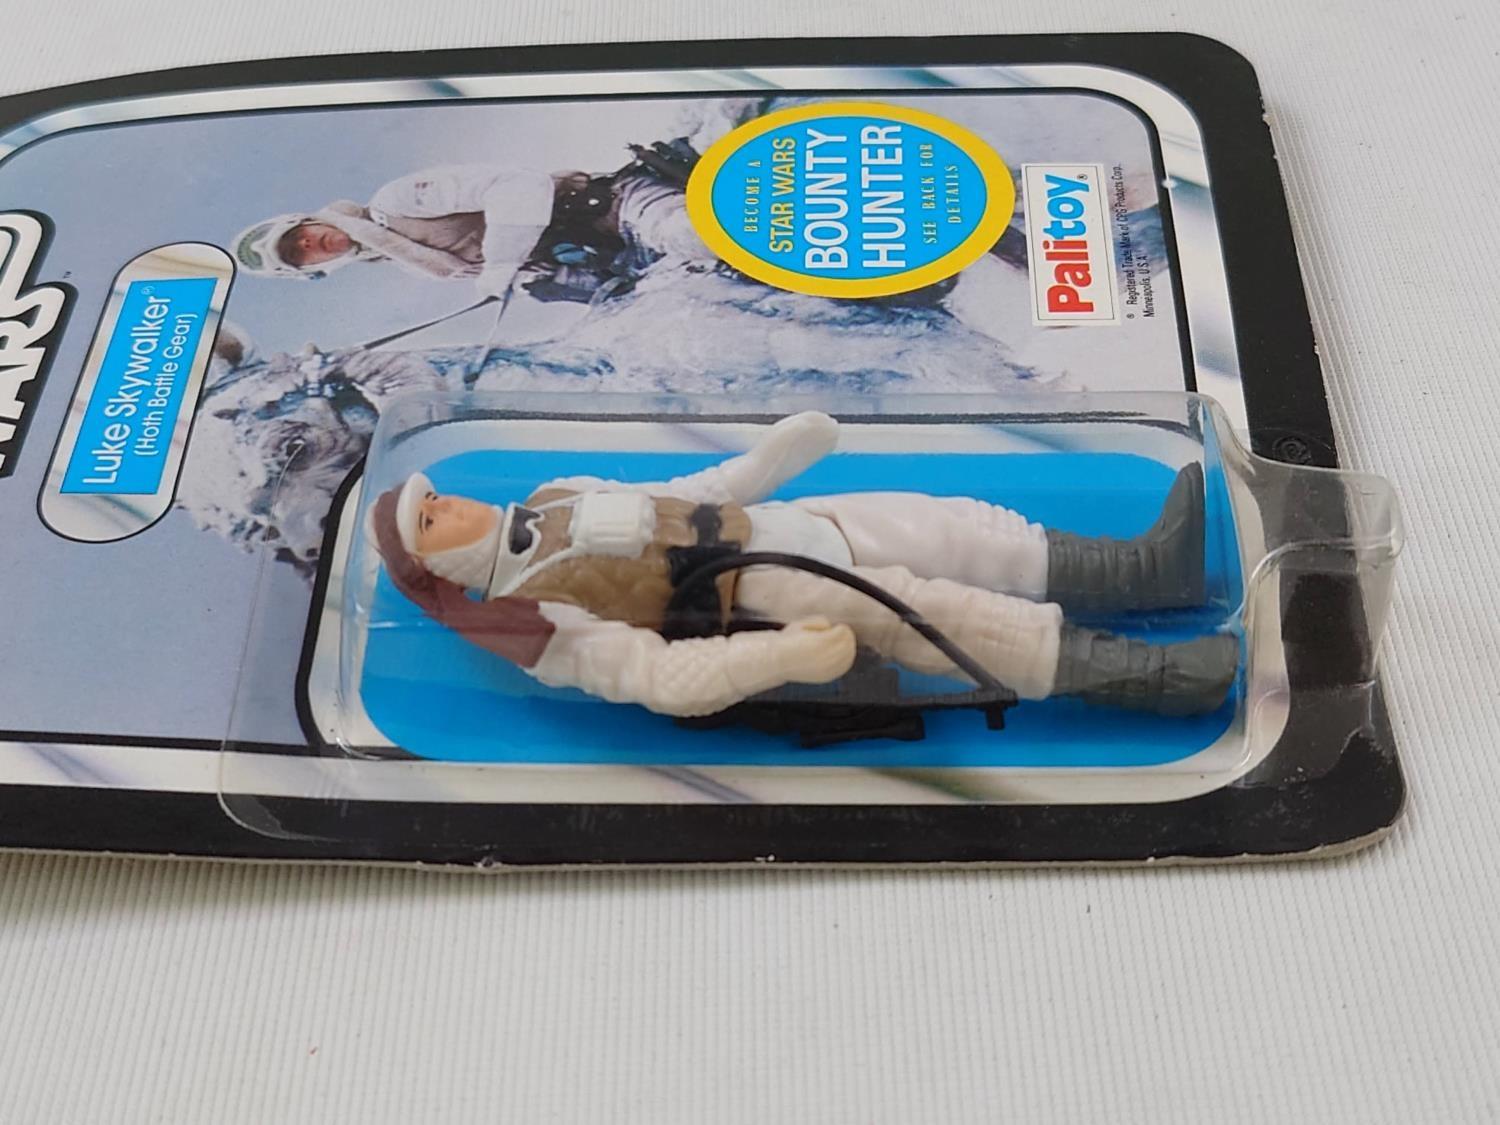 3 Vintage Star Wars Palitoy Lucasfilm figures 3 Logo Return of the Jedi Han Solo (In trench Coat), - Image 9 of 9